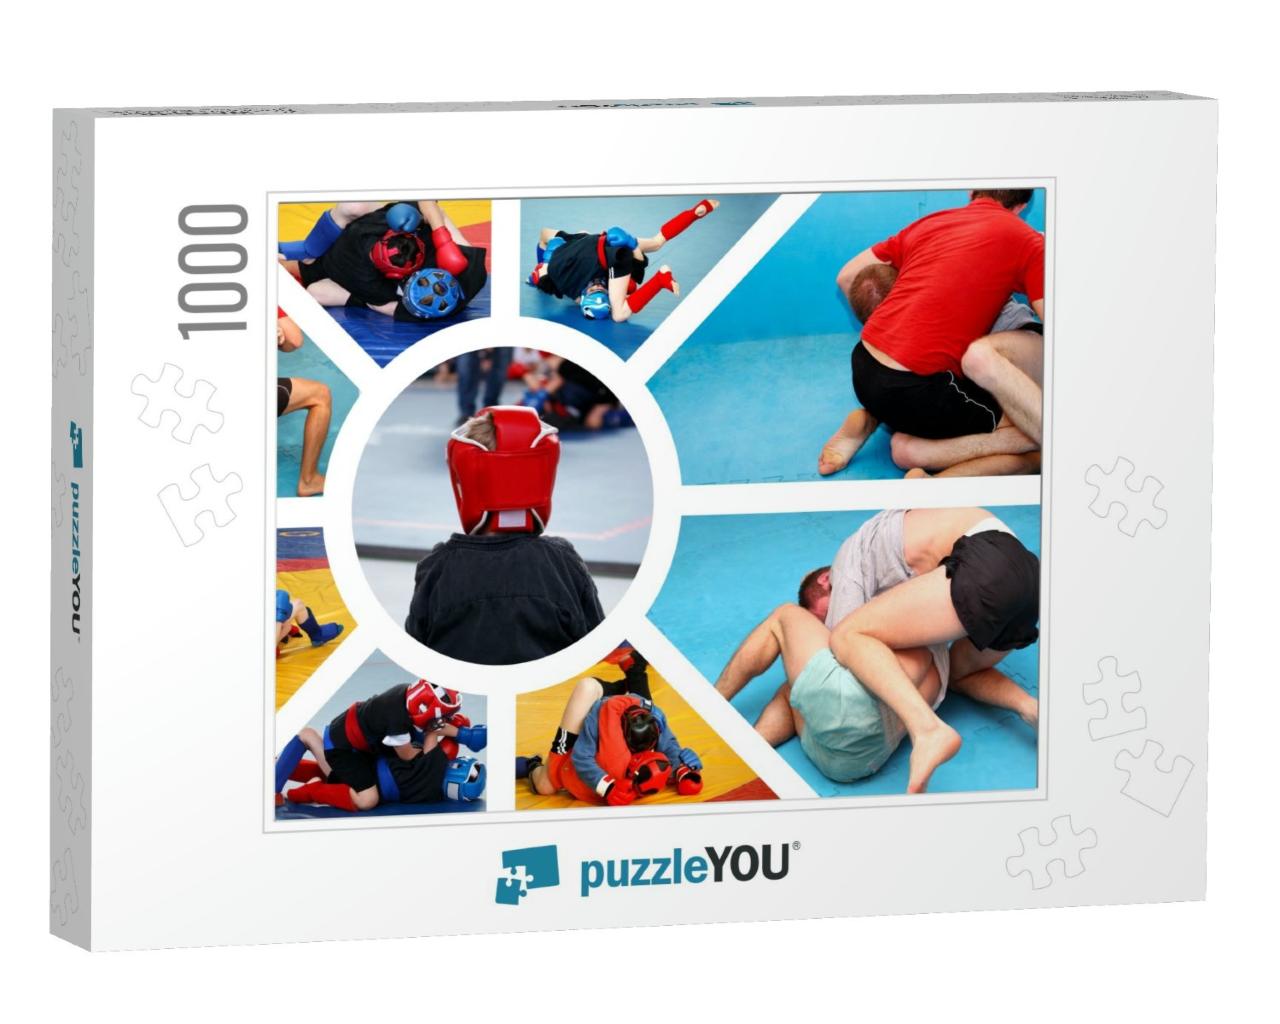 Creative Sport Collage About Wrestling Competitions & Tra... Jigsaw Puzzle with 1000 pieces